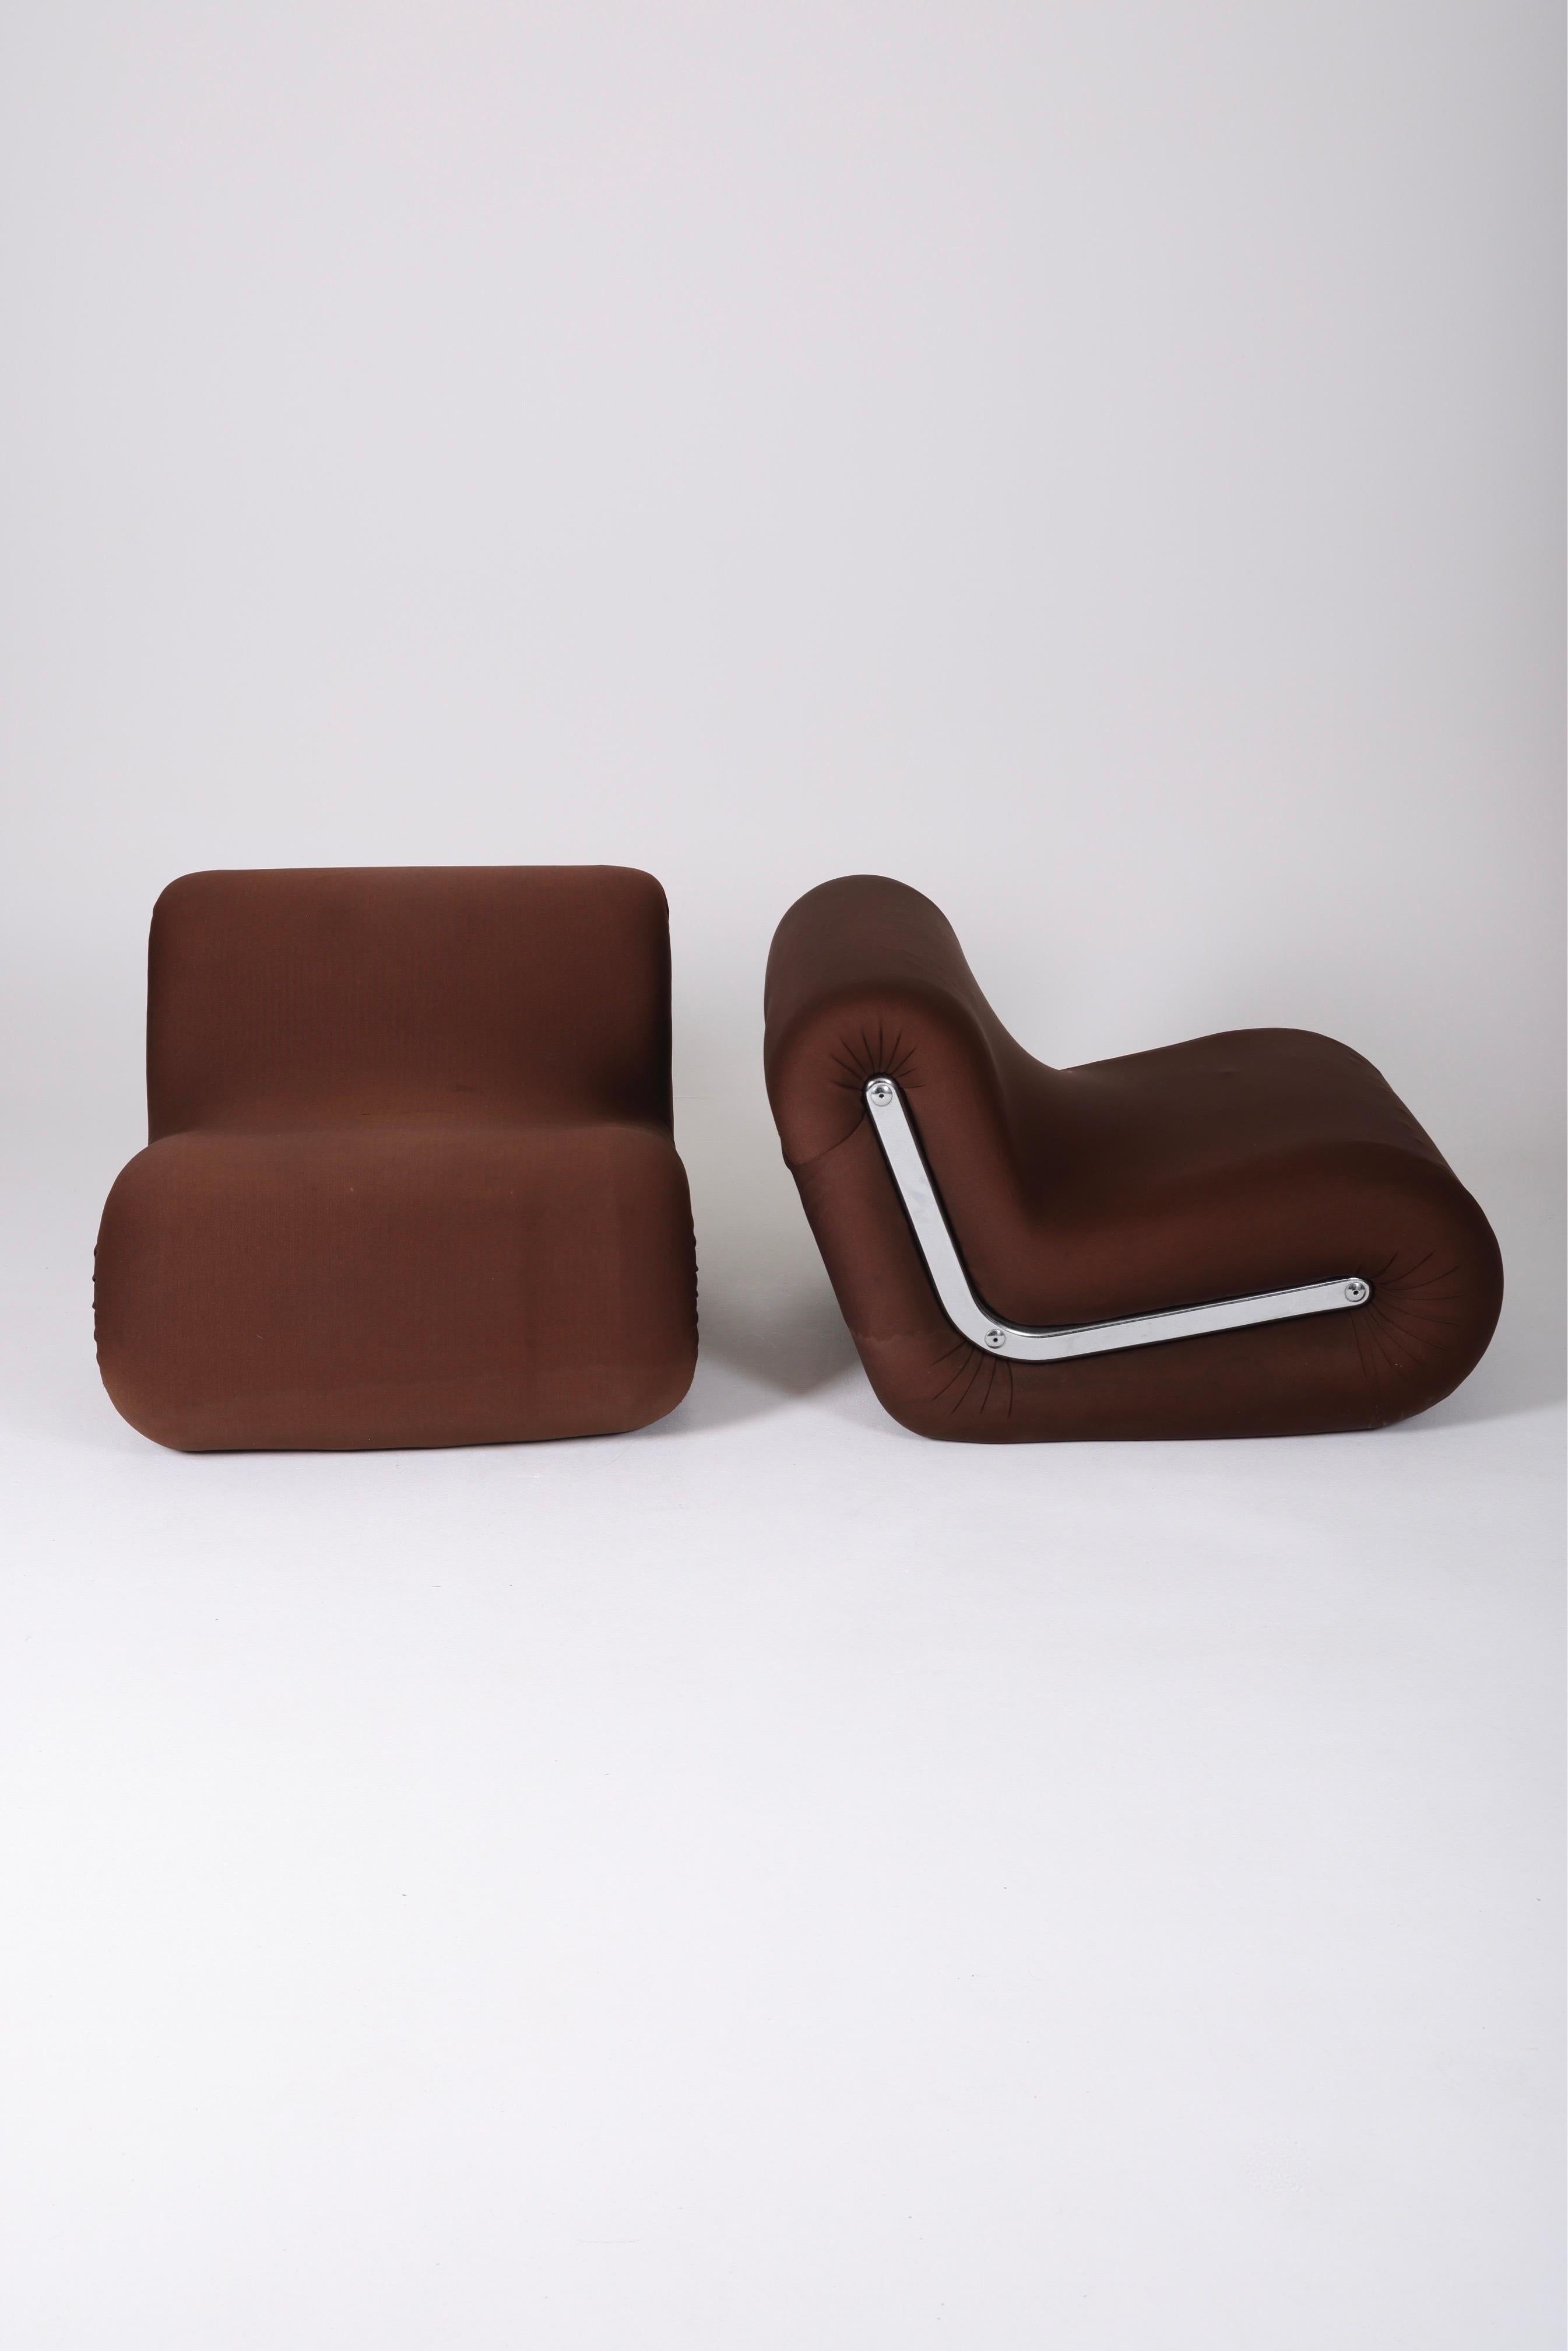 Boomerang armchair by Italian designer Rodolfo Bonetto, from the 1960s. Metal frame, brown fabric upholstery, and chrome metal detailing on each side. Some fabric tears.
LP723/724